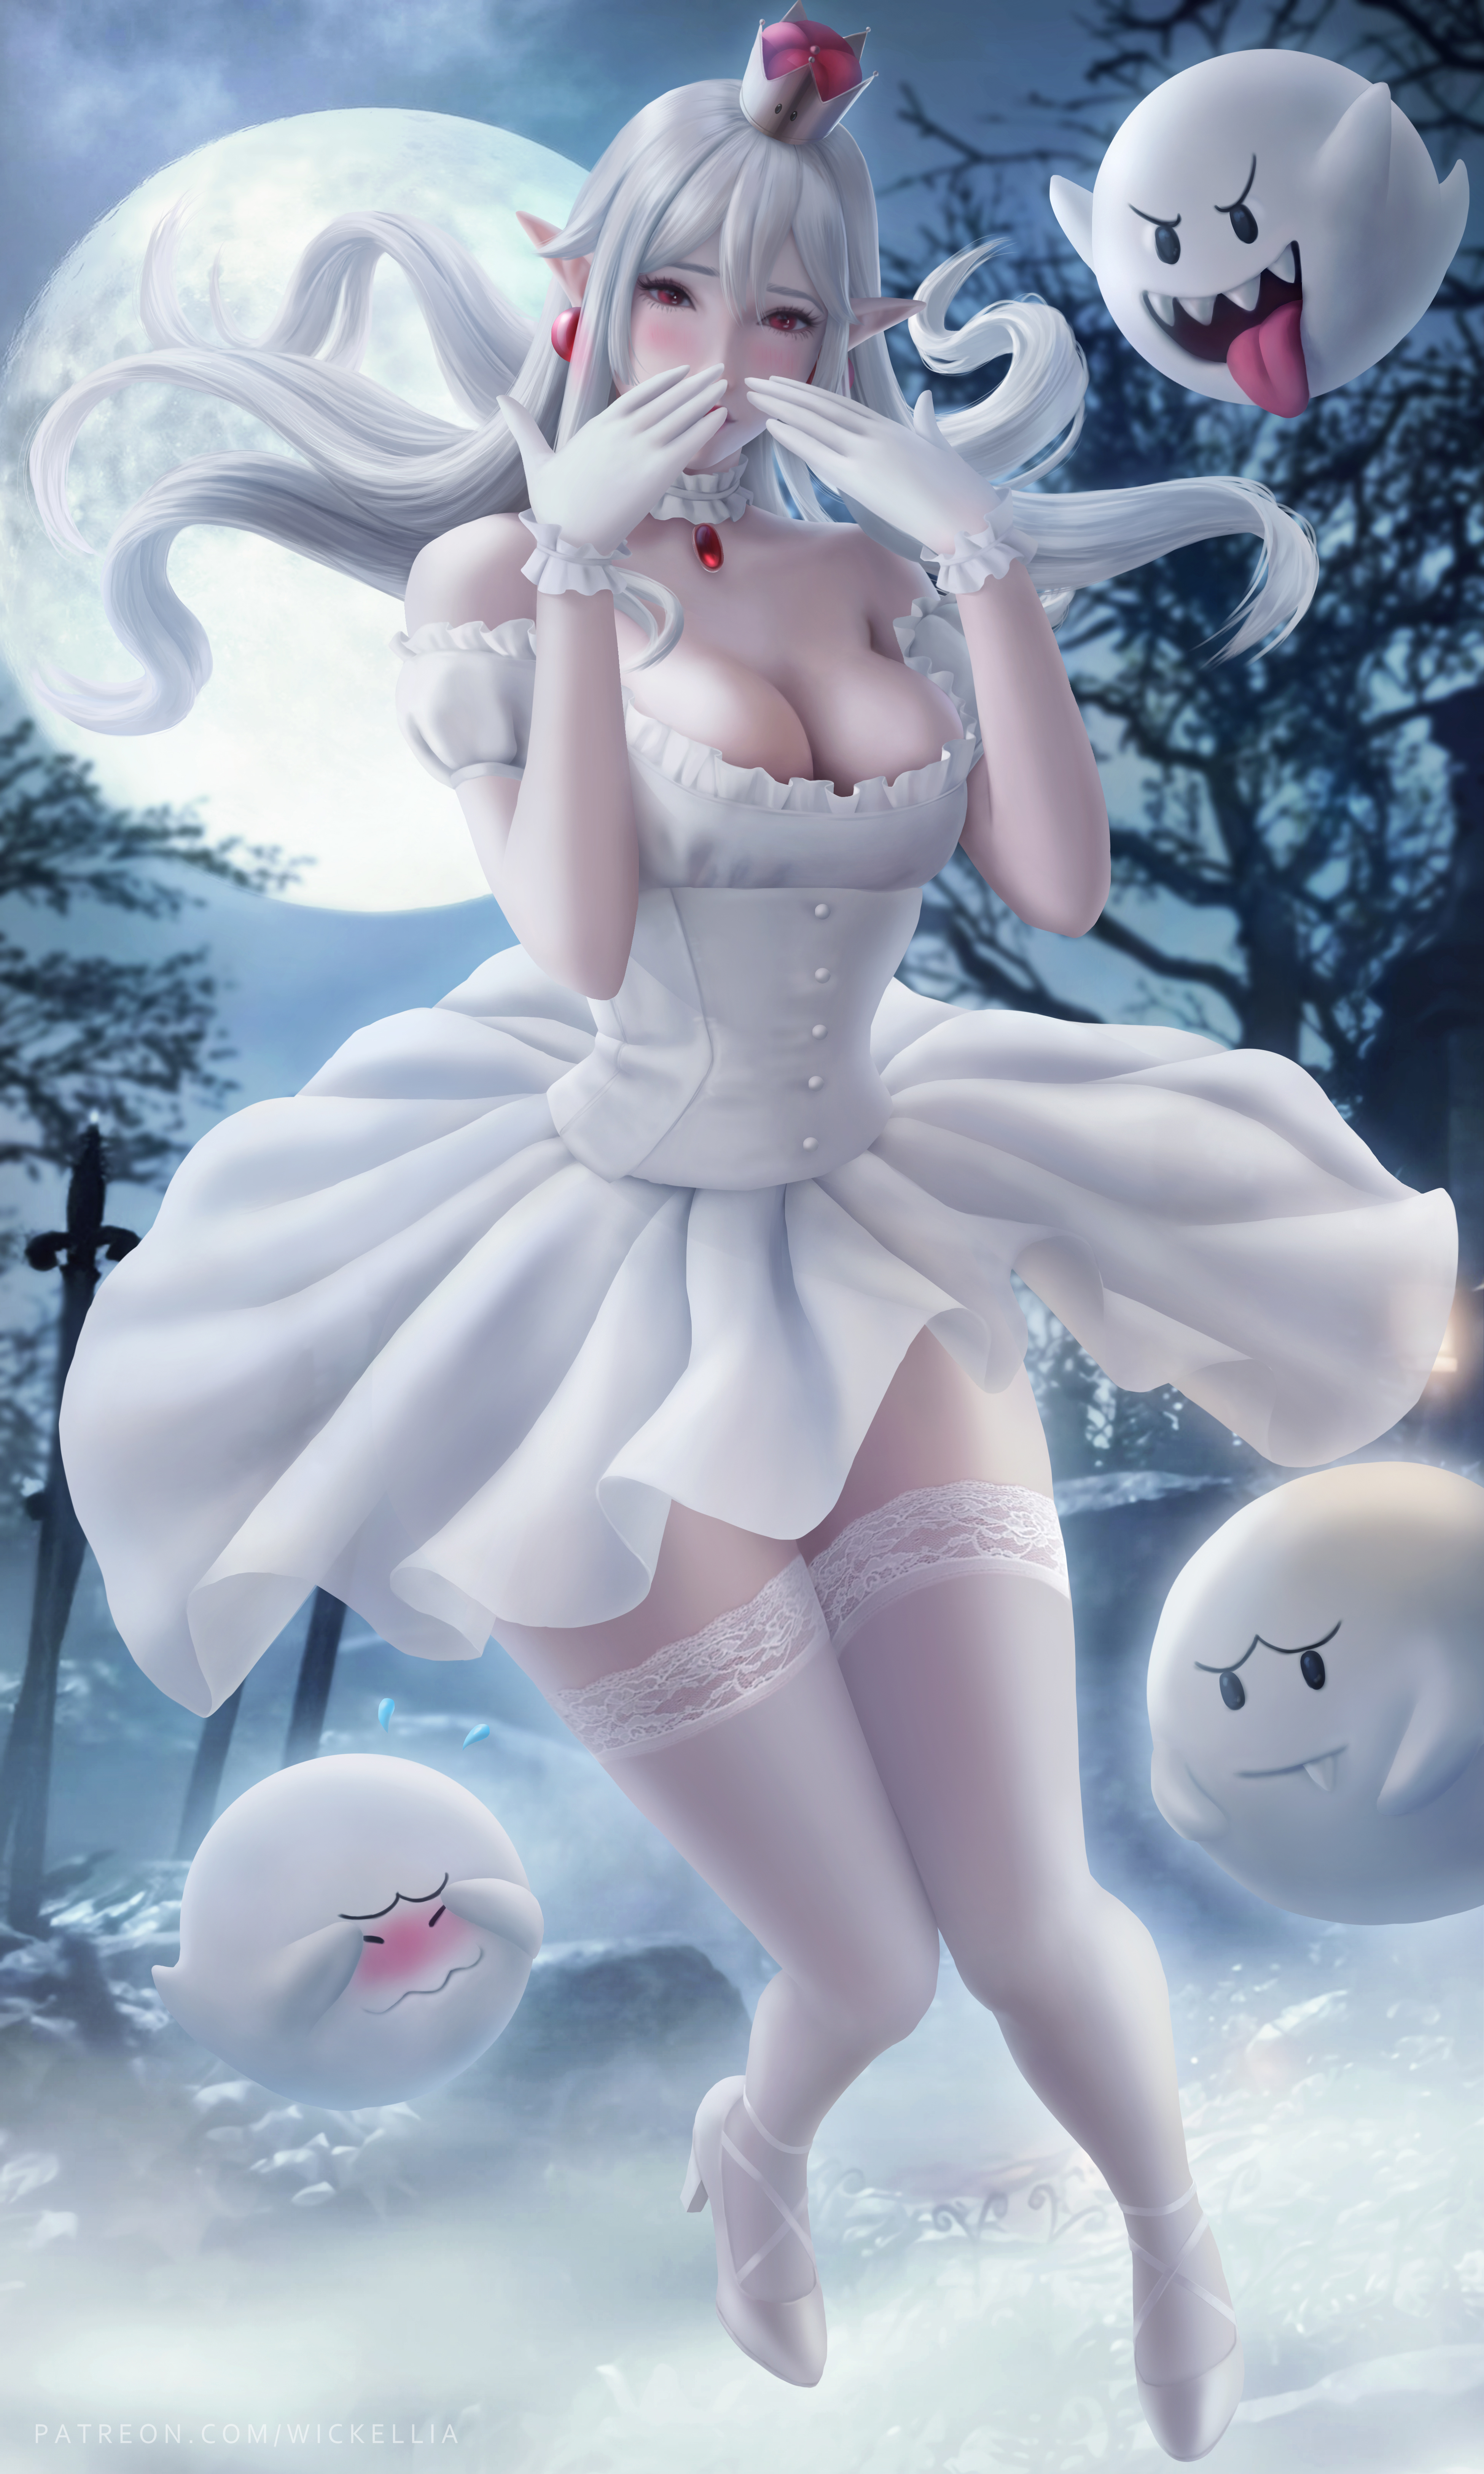 Boosette Super Mario Bros Video Games Pointy Ears Bare Shoulders Dress White Dress Blushing Gloves G 3900x6500